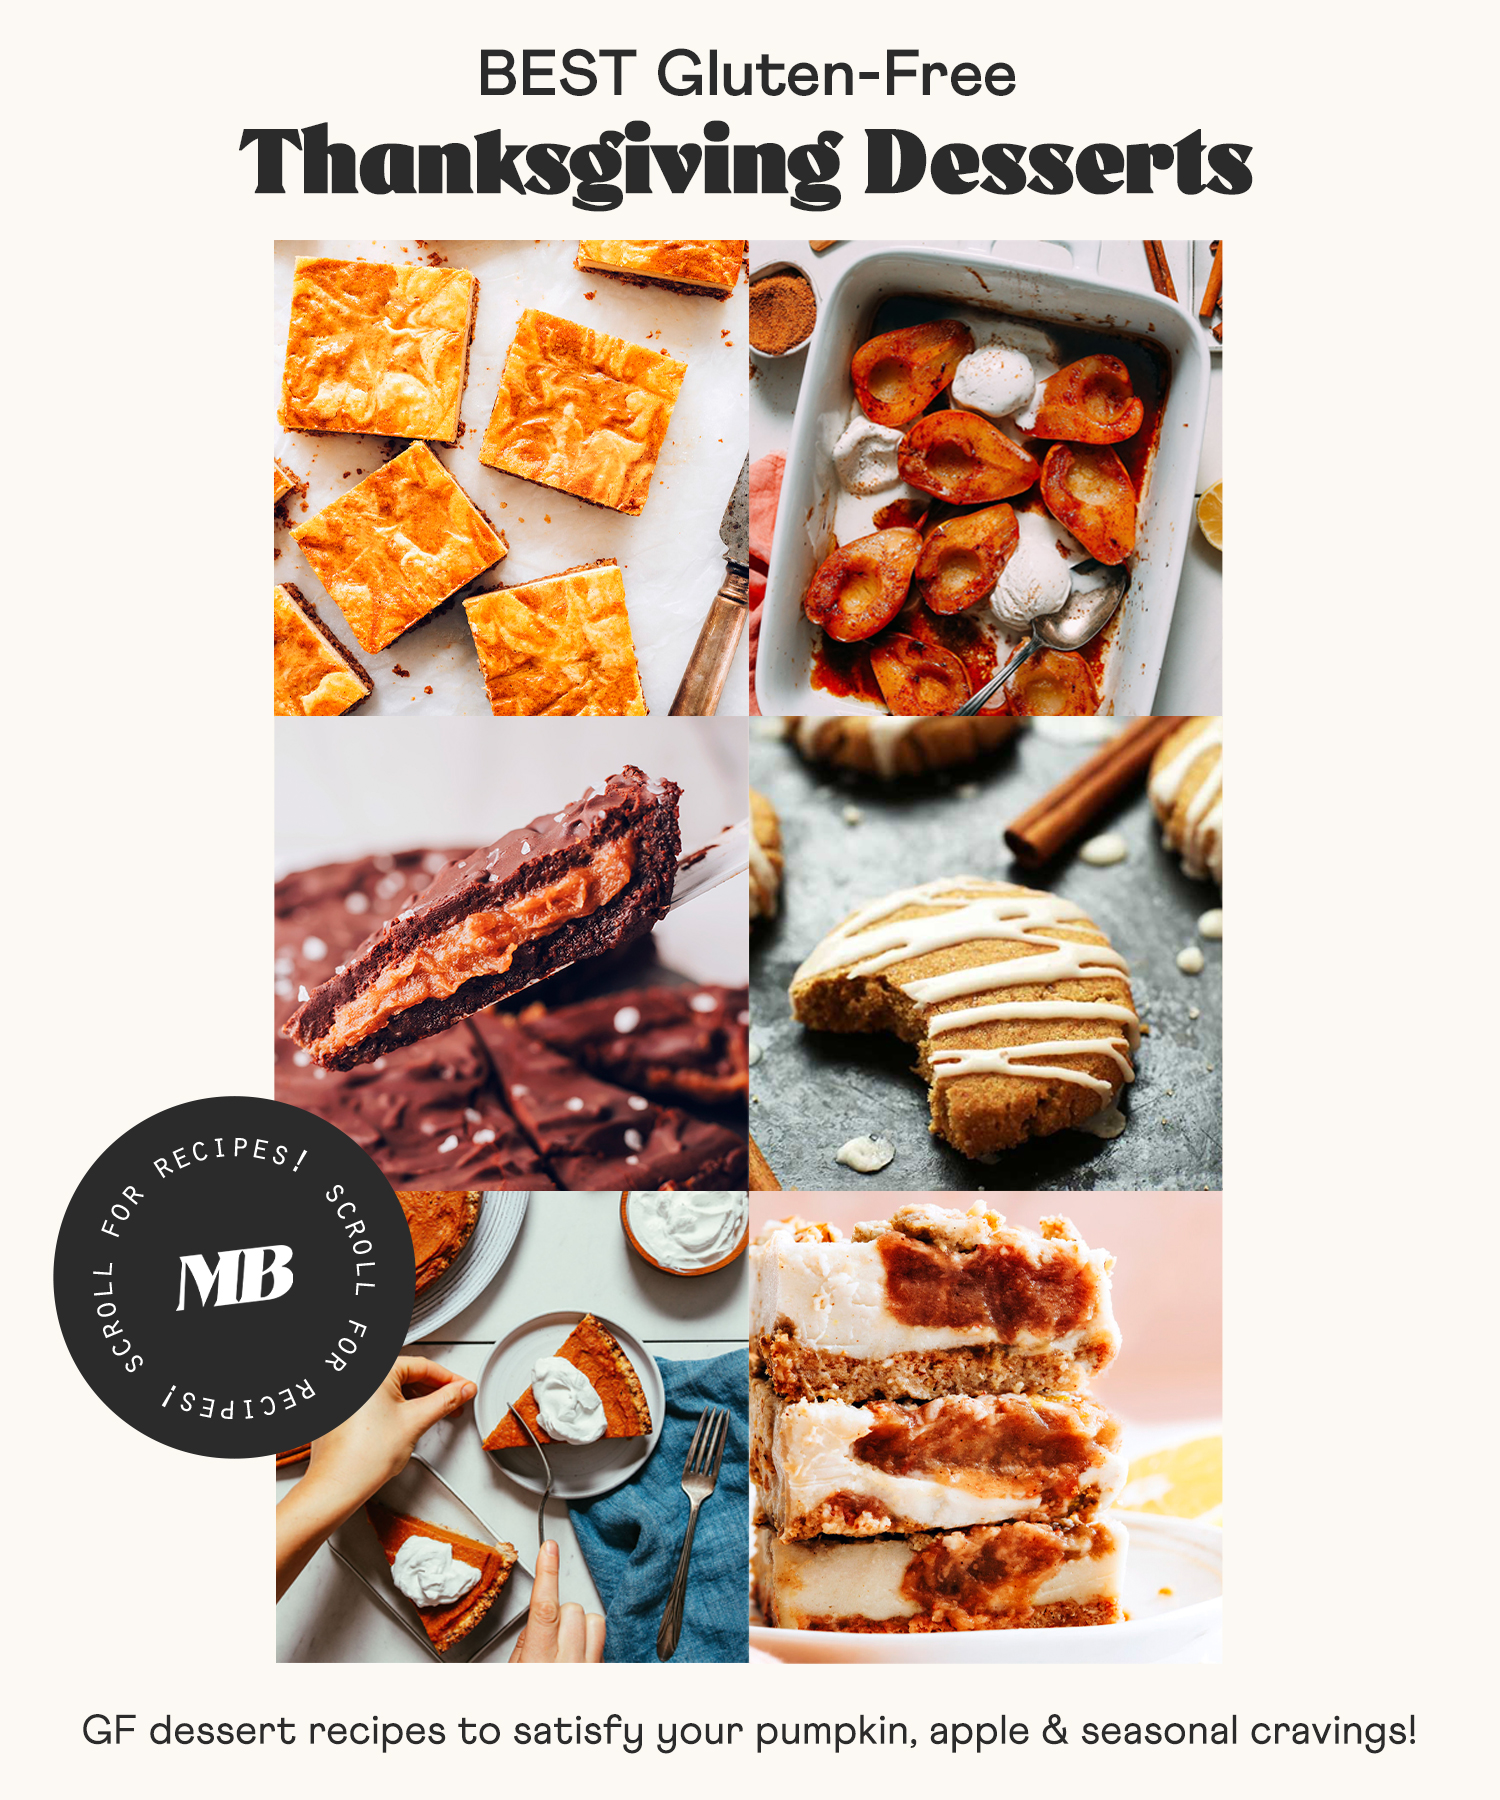 Images of the best gluten-free thanksgiving desserts